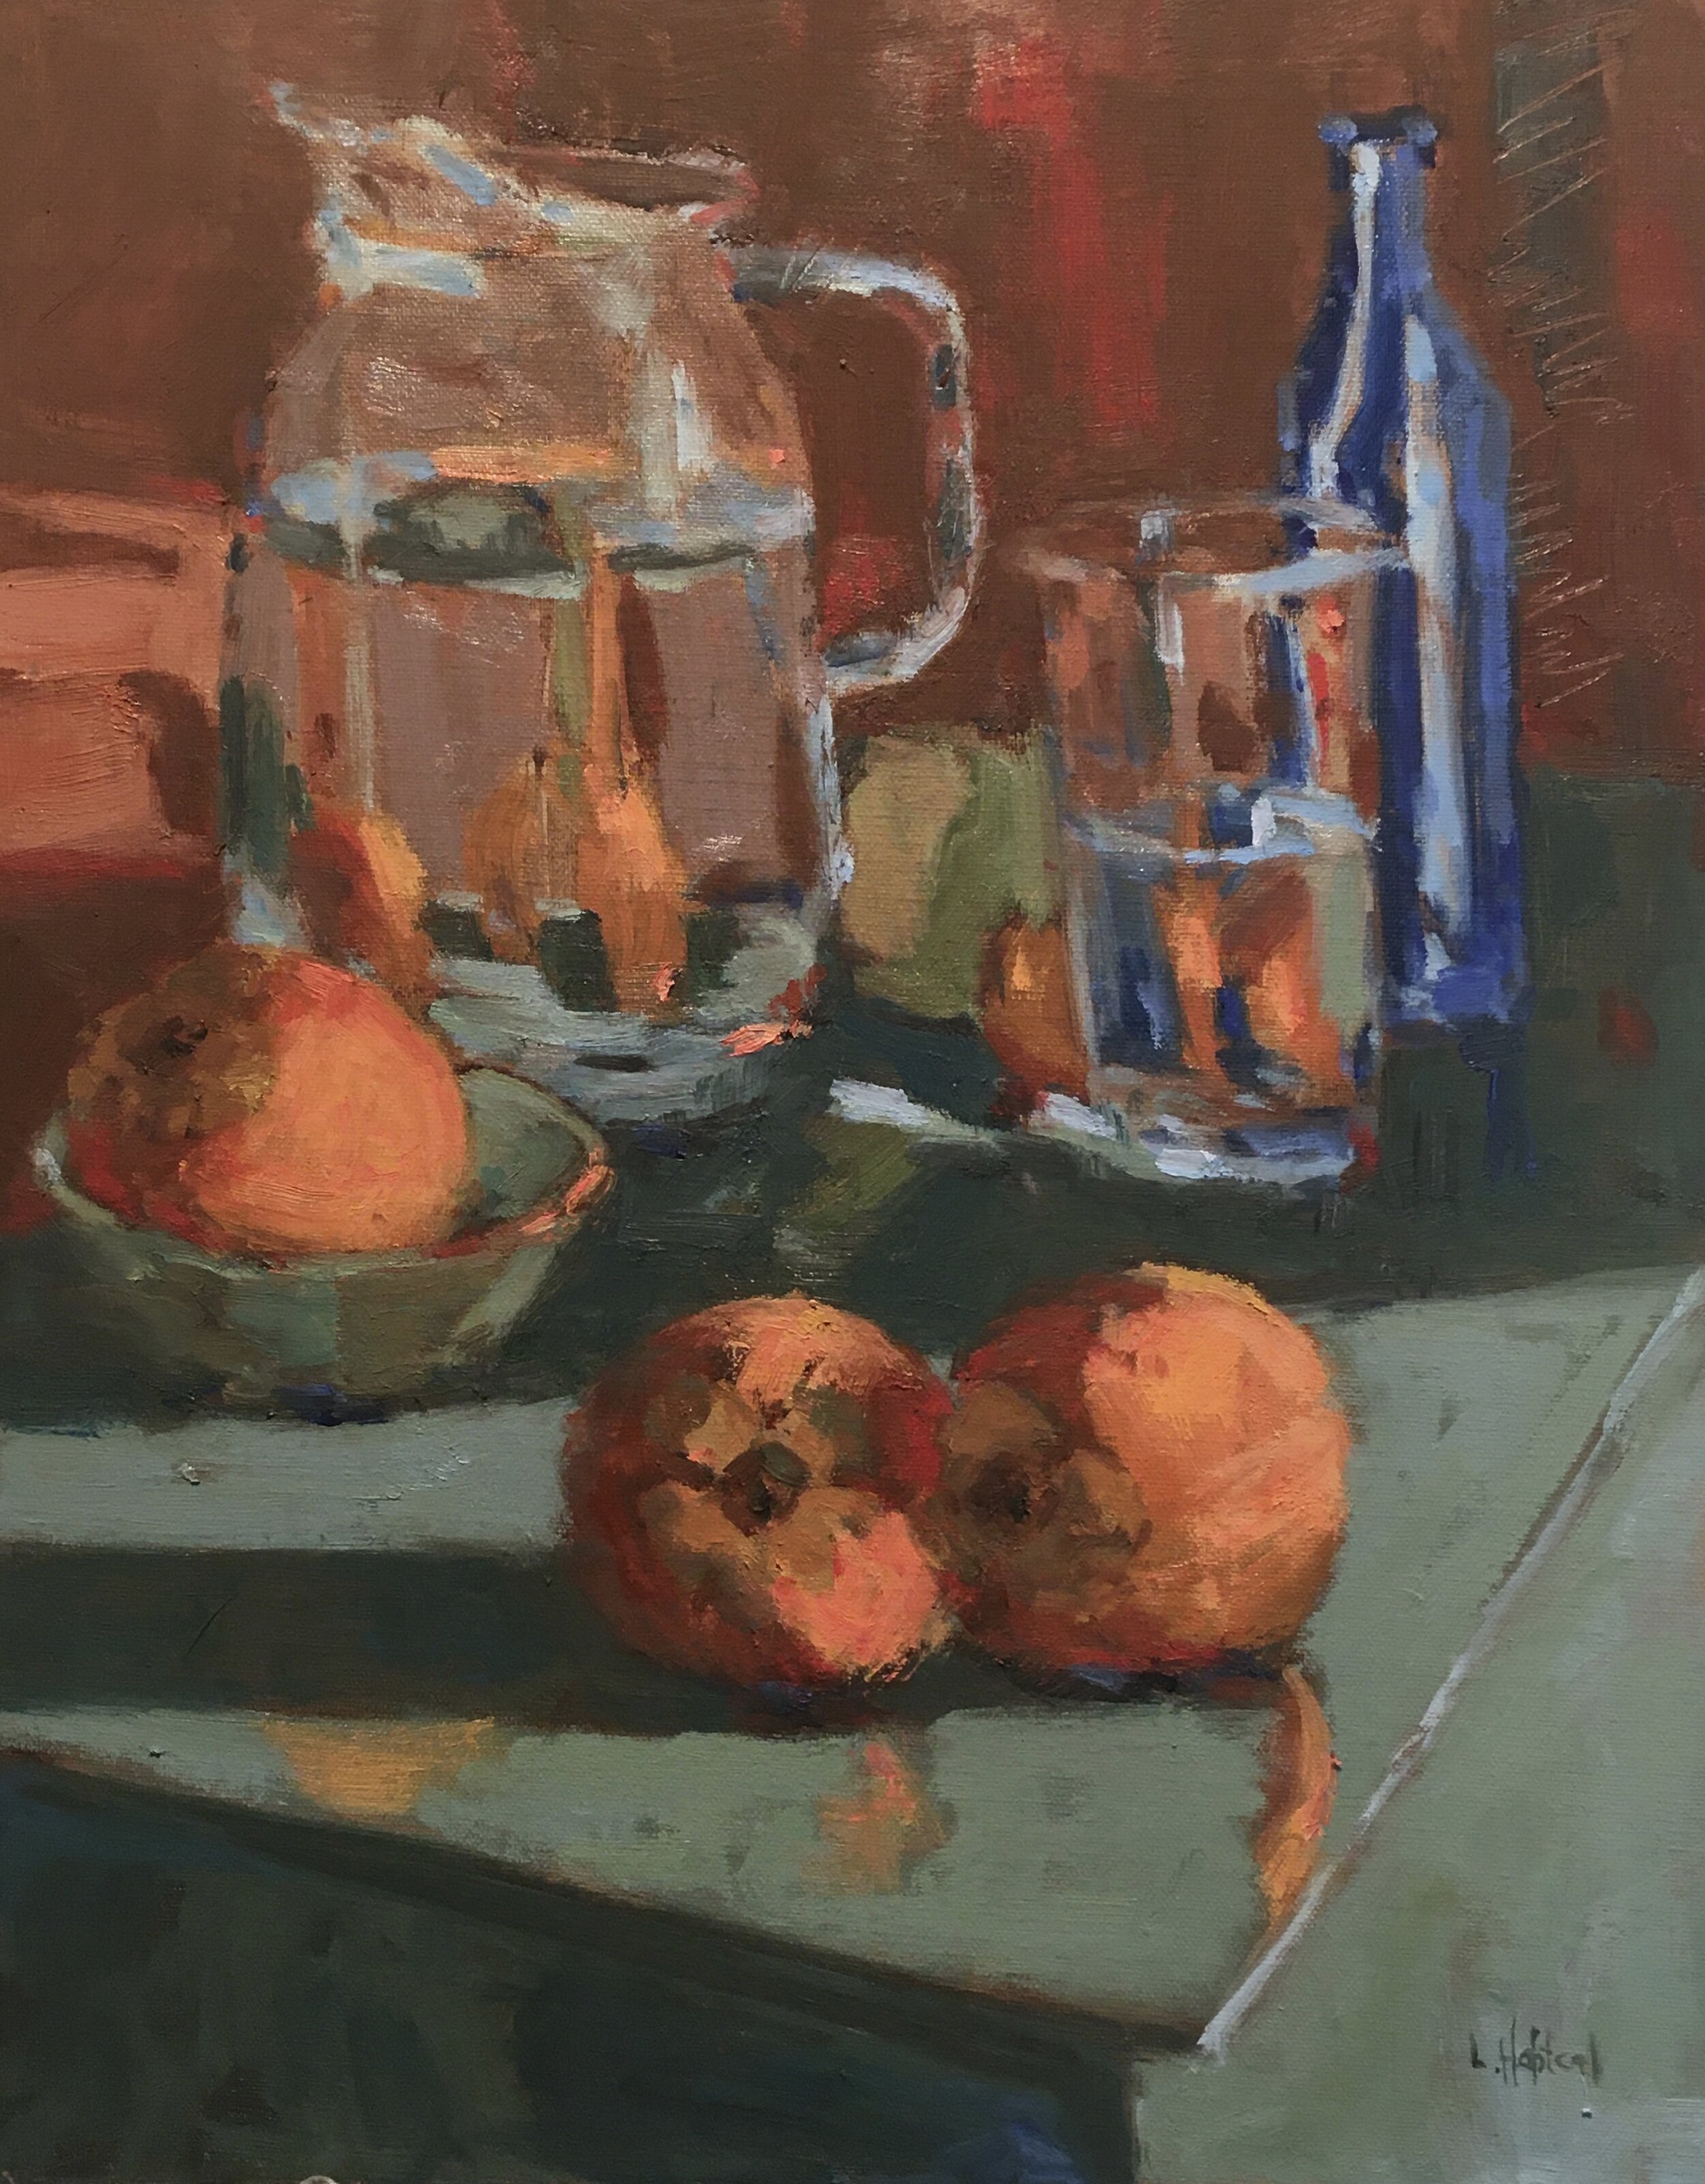 Persimmons, Oil on linen, 14 x 11